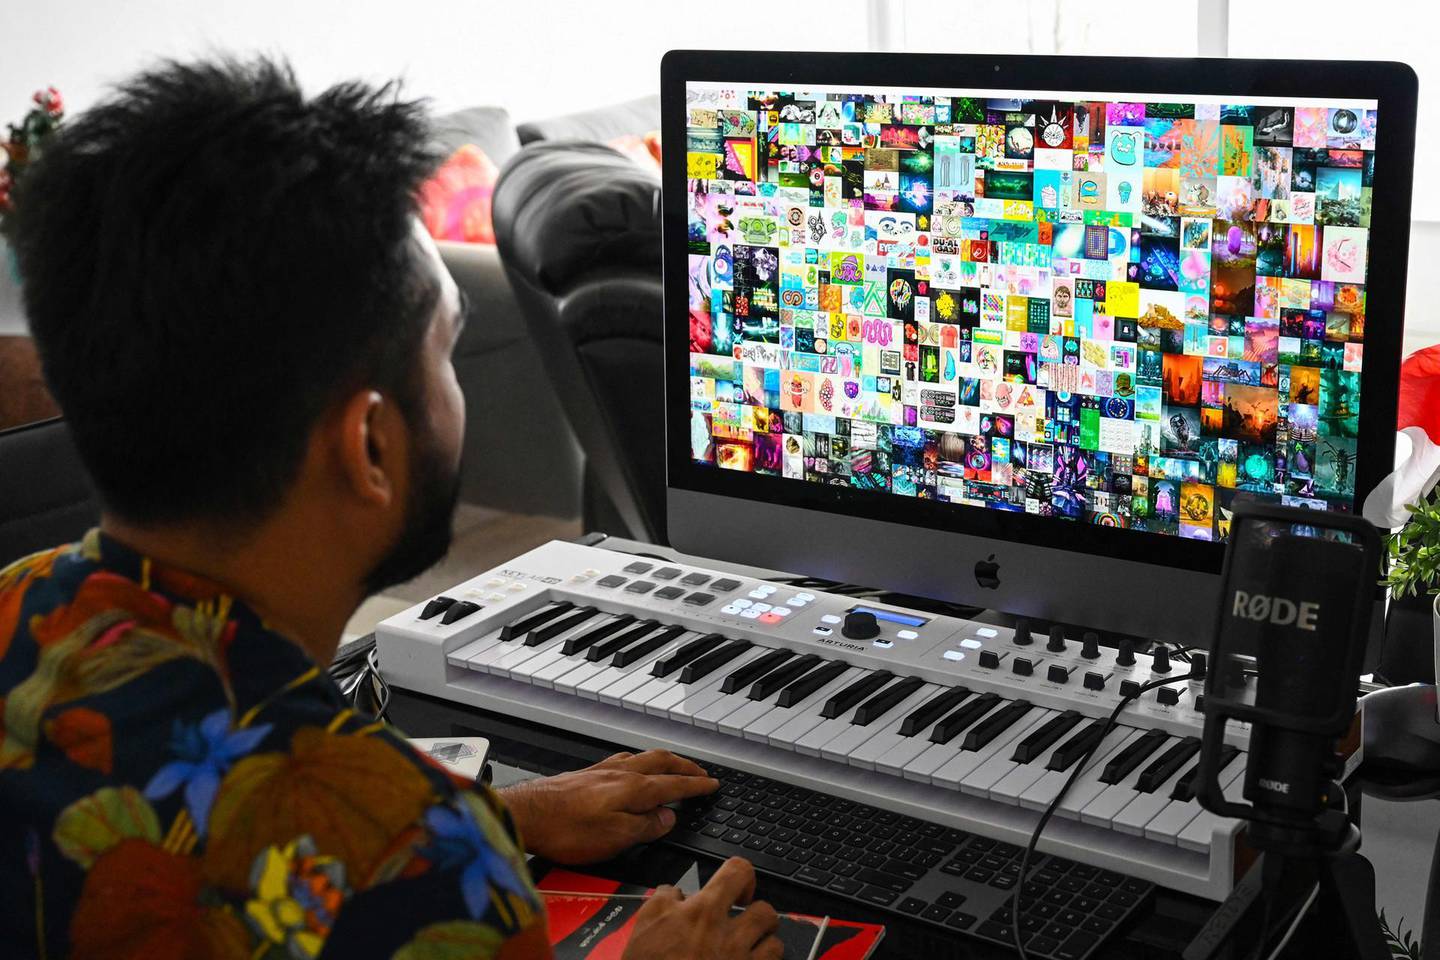 This picture taken on April 7, 2021 shows blockchain entrepreneur Vignesh Sundaresan, also known by his pseudonym MetaKovan, showing the digital artwork non-fungible token (NFT) "Everydays: The First 5,000 Days" by artist Beeple in his home in Singapore. Last month the programmer bought the world's most expensive NFT for $69.3 million, highlighting how virtual work is establishing itself as a new creative genre.  - RESTRICTED TO EDITORIAL USE - MANDATORY MENTION OF THE ARTIST UPON PUBLICATION - TO ILLUSTRATE THE EVENT AS SPECIFIED IN THE CAPTION

TO GO WITH Singapore-US-arts-IT, INTERVIEW by Catherine LAI
 / AFP / Roslan RAHMAN / RESTRICTED TO EDITORIAL USE - MANDATORY MENTION OF THE ARTIST UPON PUBLICATION - TO ILLUSTRATE THE EVENT AS SPECIFIED IN THE CAPTION

TO GO WITH Singapore-US-arts-IT, INTERVIEW by Catherine LAI
